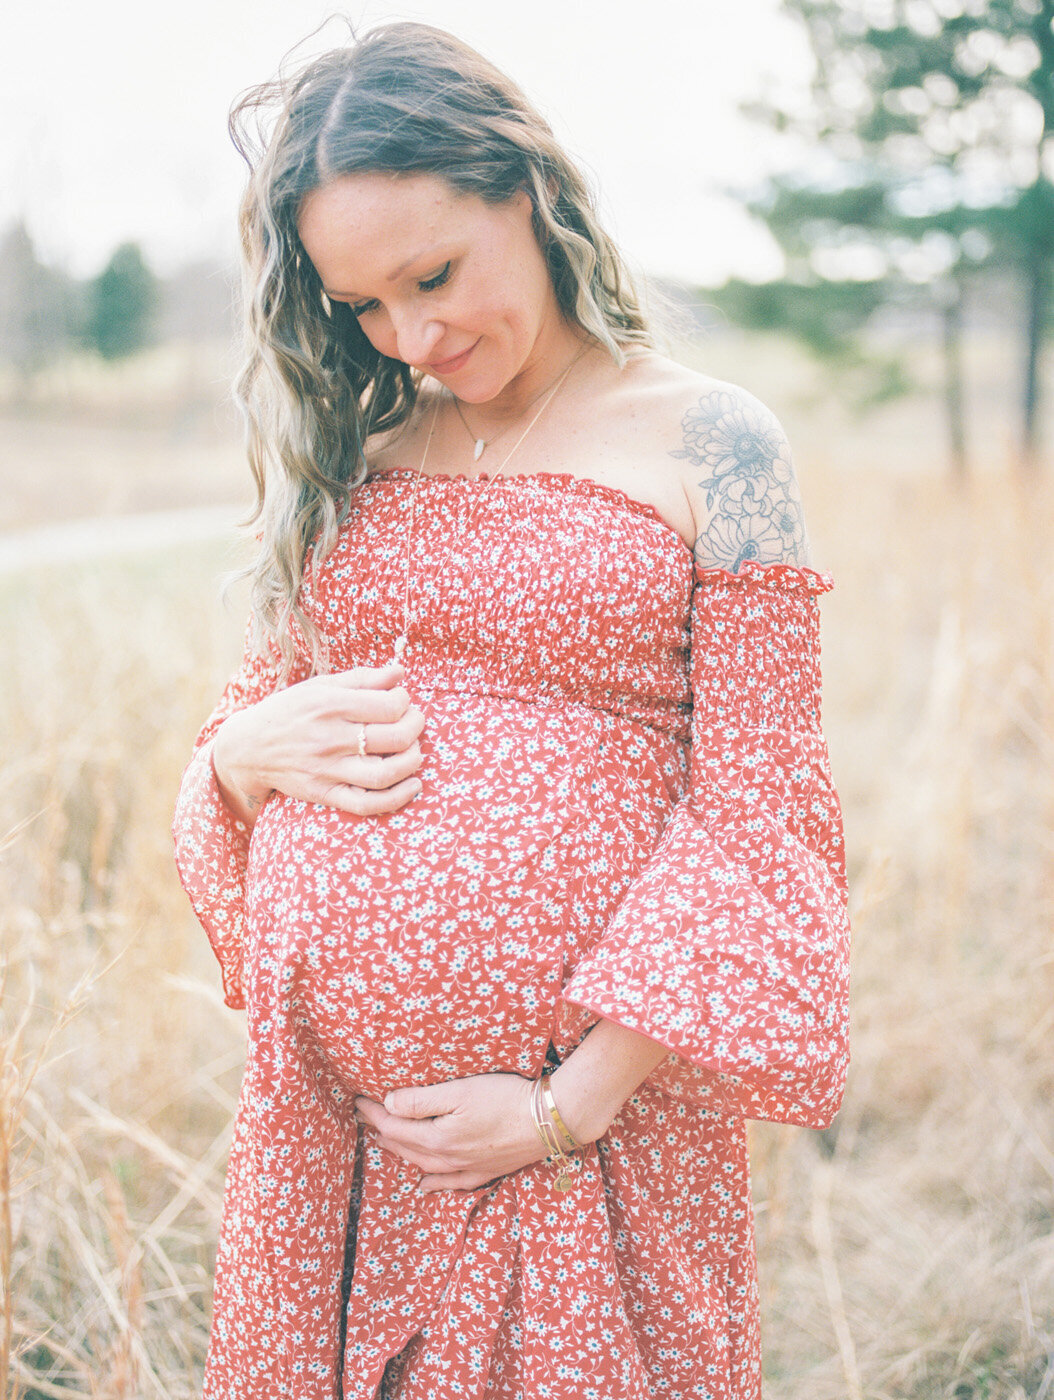 Raleigh Maternity Photographer | Jessica Agee Photography - 004